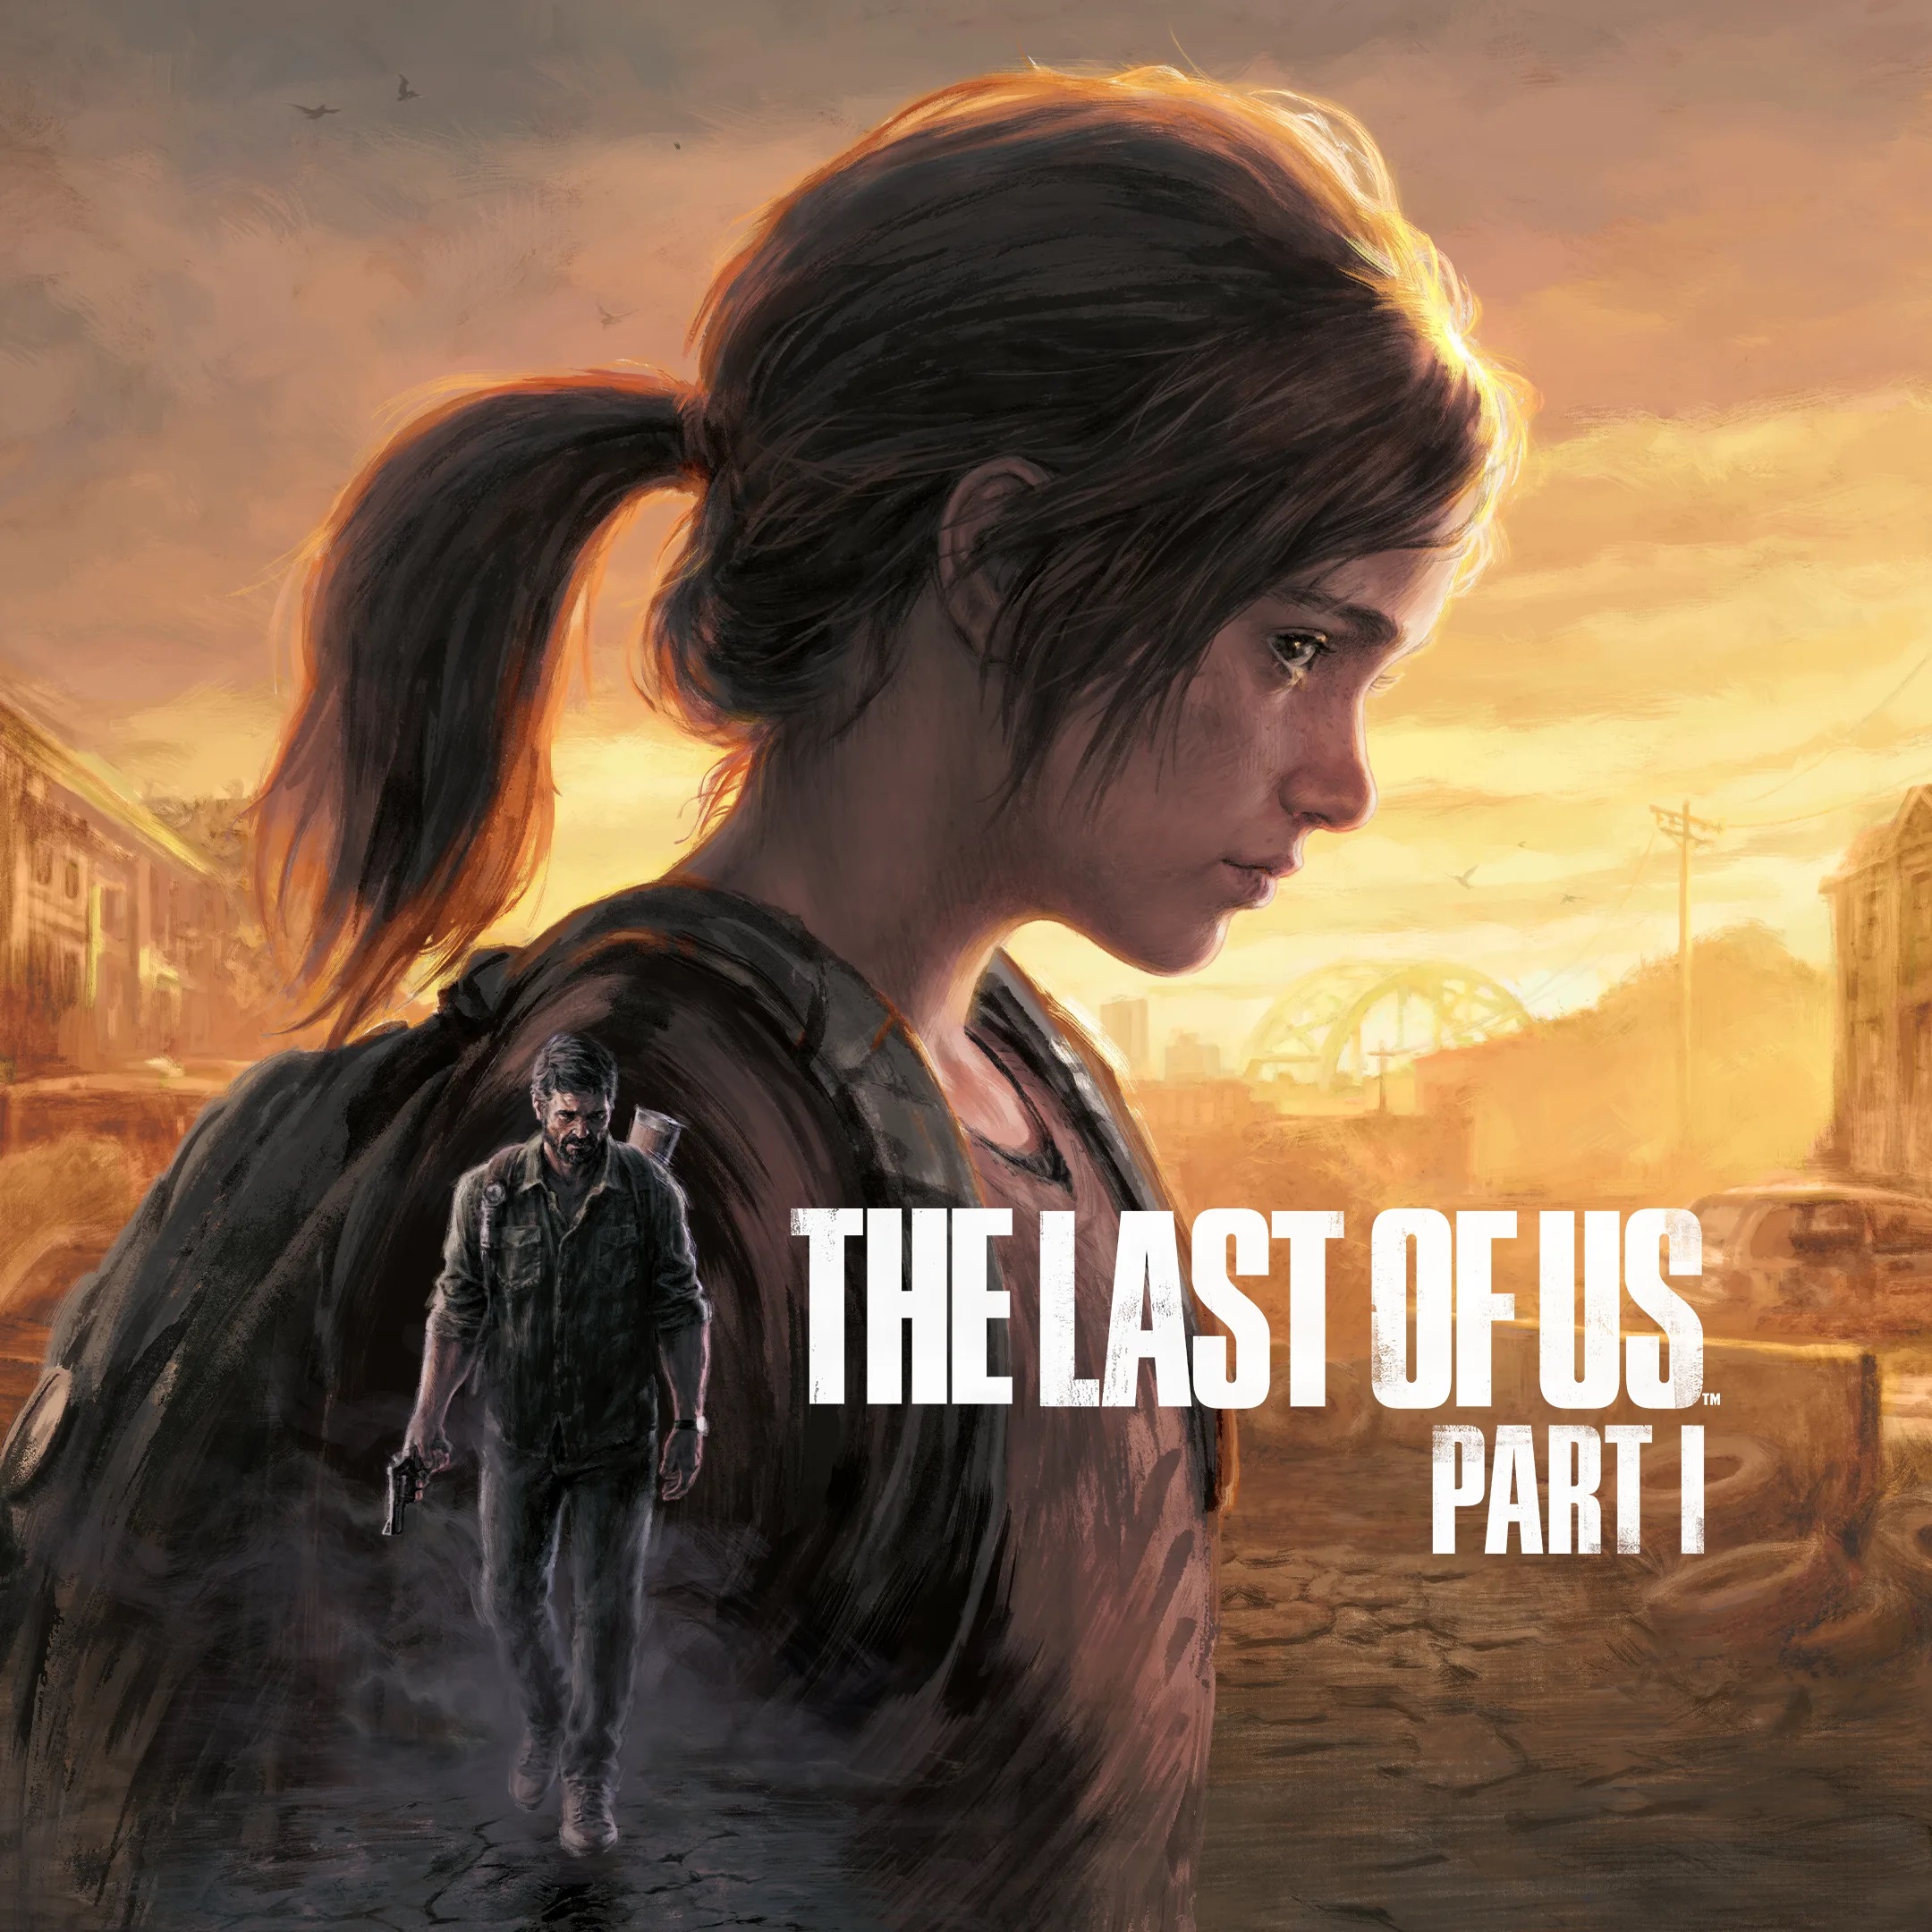 The Last of Us episode 3 release time (by time zone)